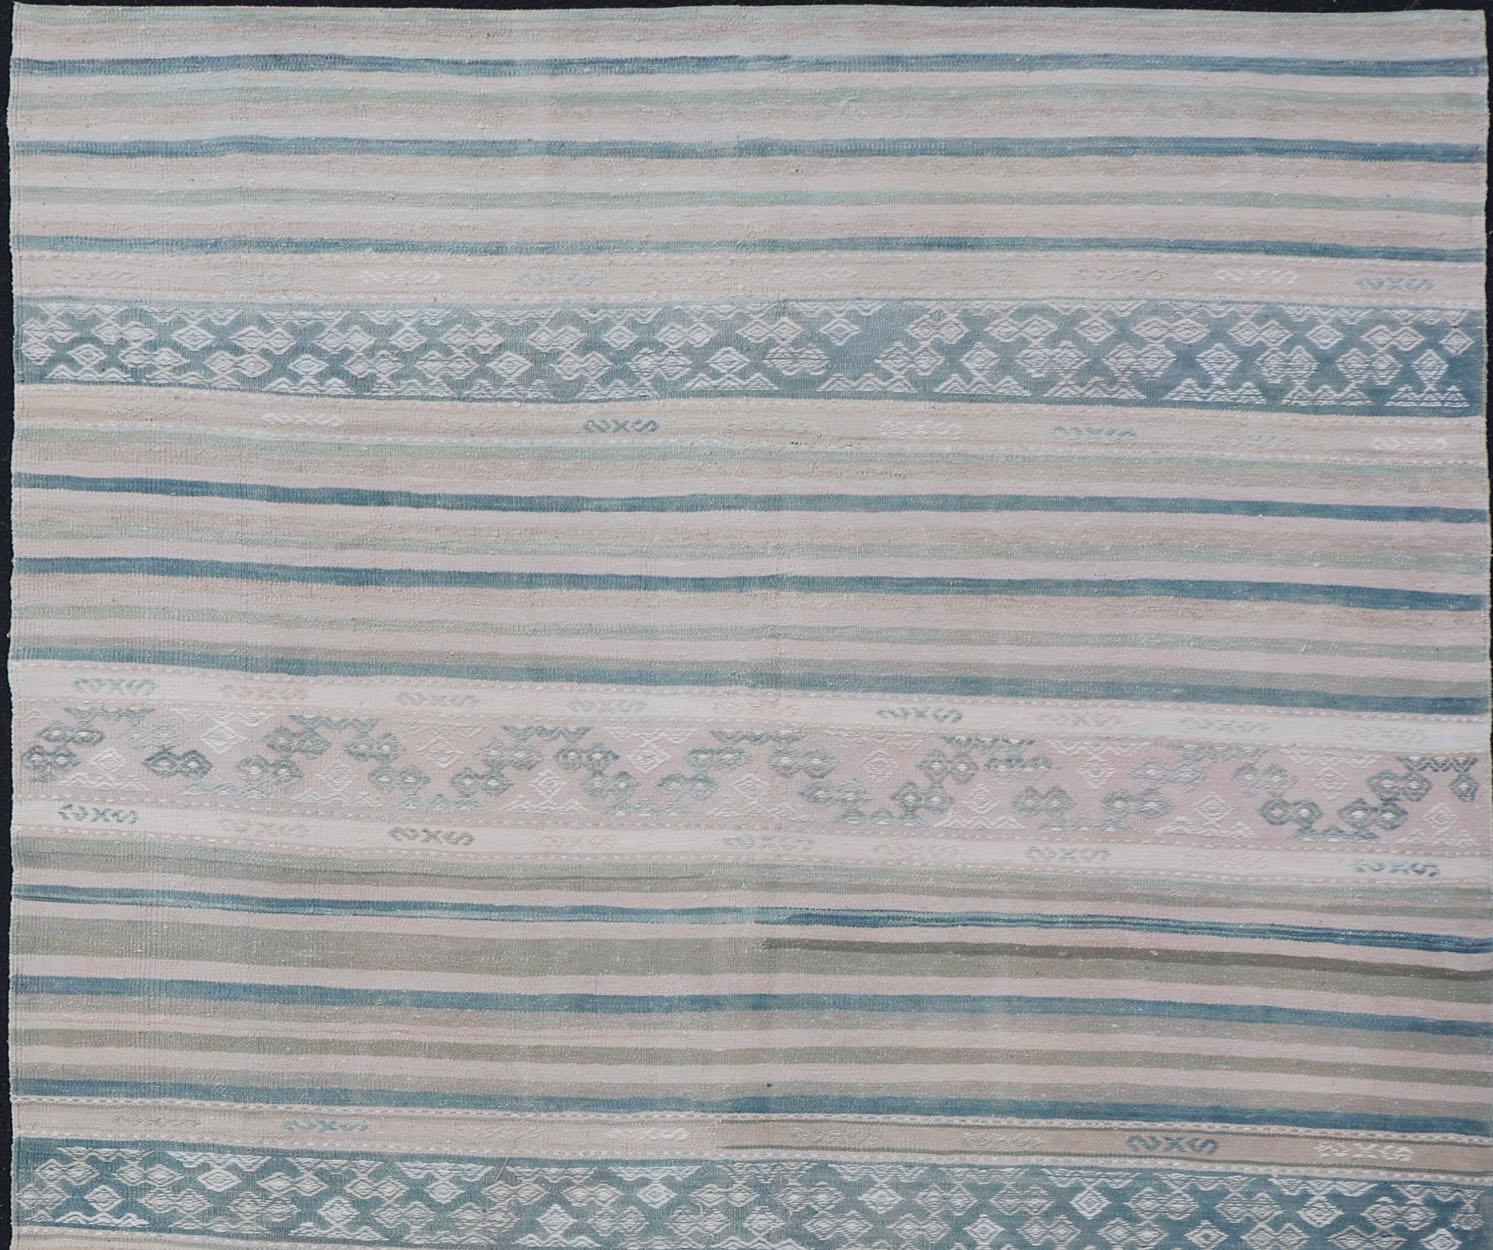        Vintage Flat-Weave Kilim with Embroideries in Blush, Green, Blue and Gray

Vintage flat-weave Kilim with embroideries in blush, green, blue and gray with a modern design
geometric stripe design Vintage Kilim from Turkey, Keivan Woven